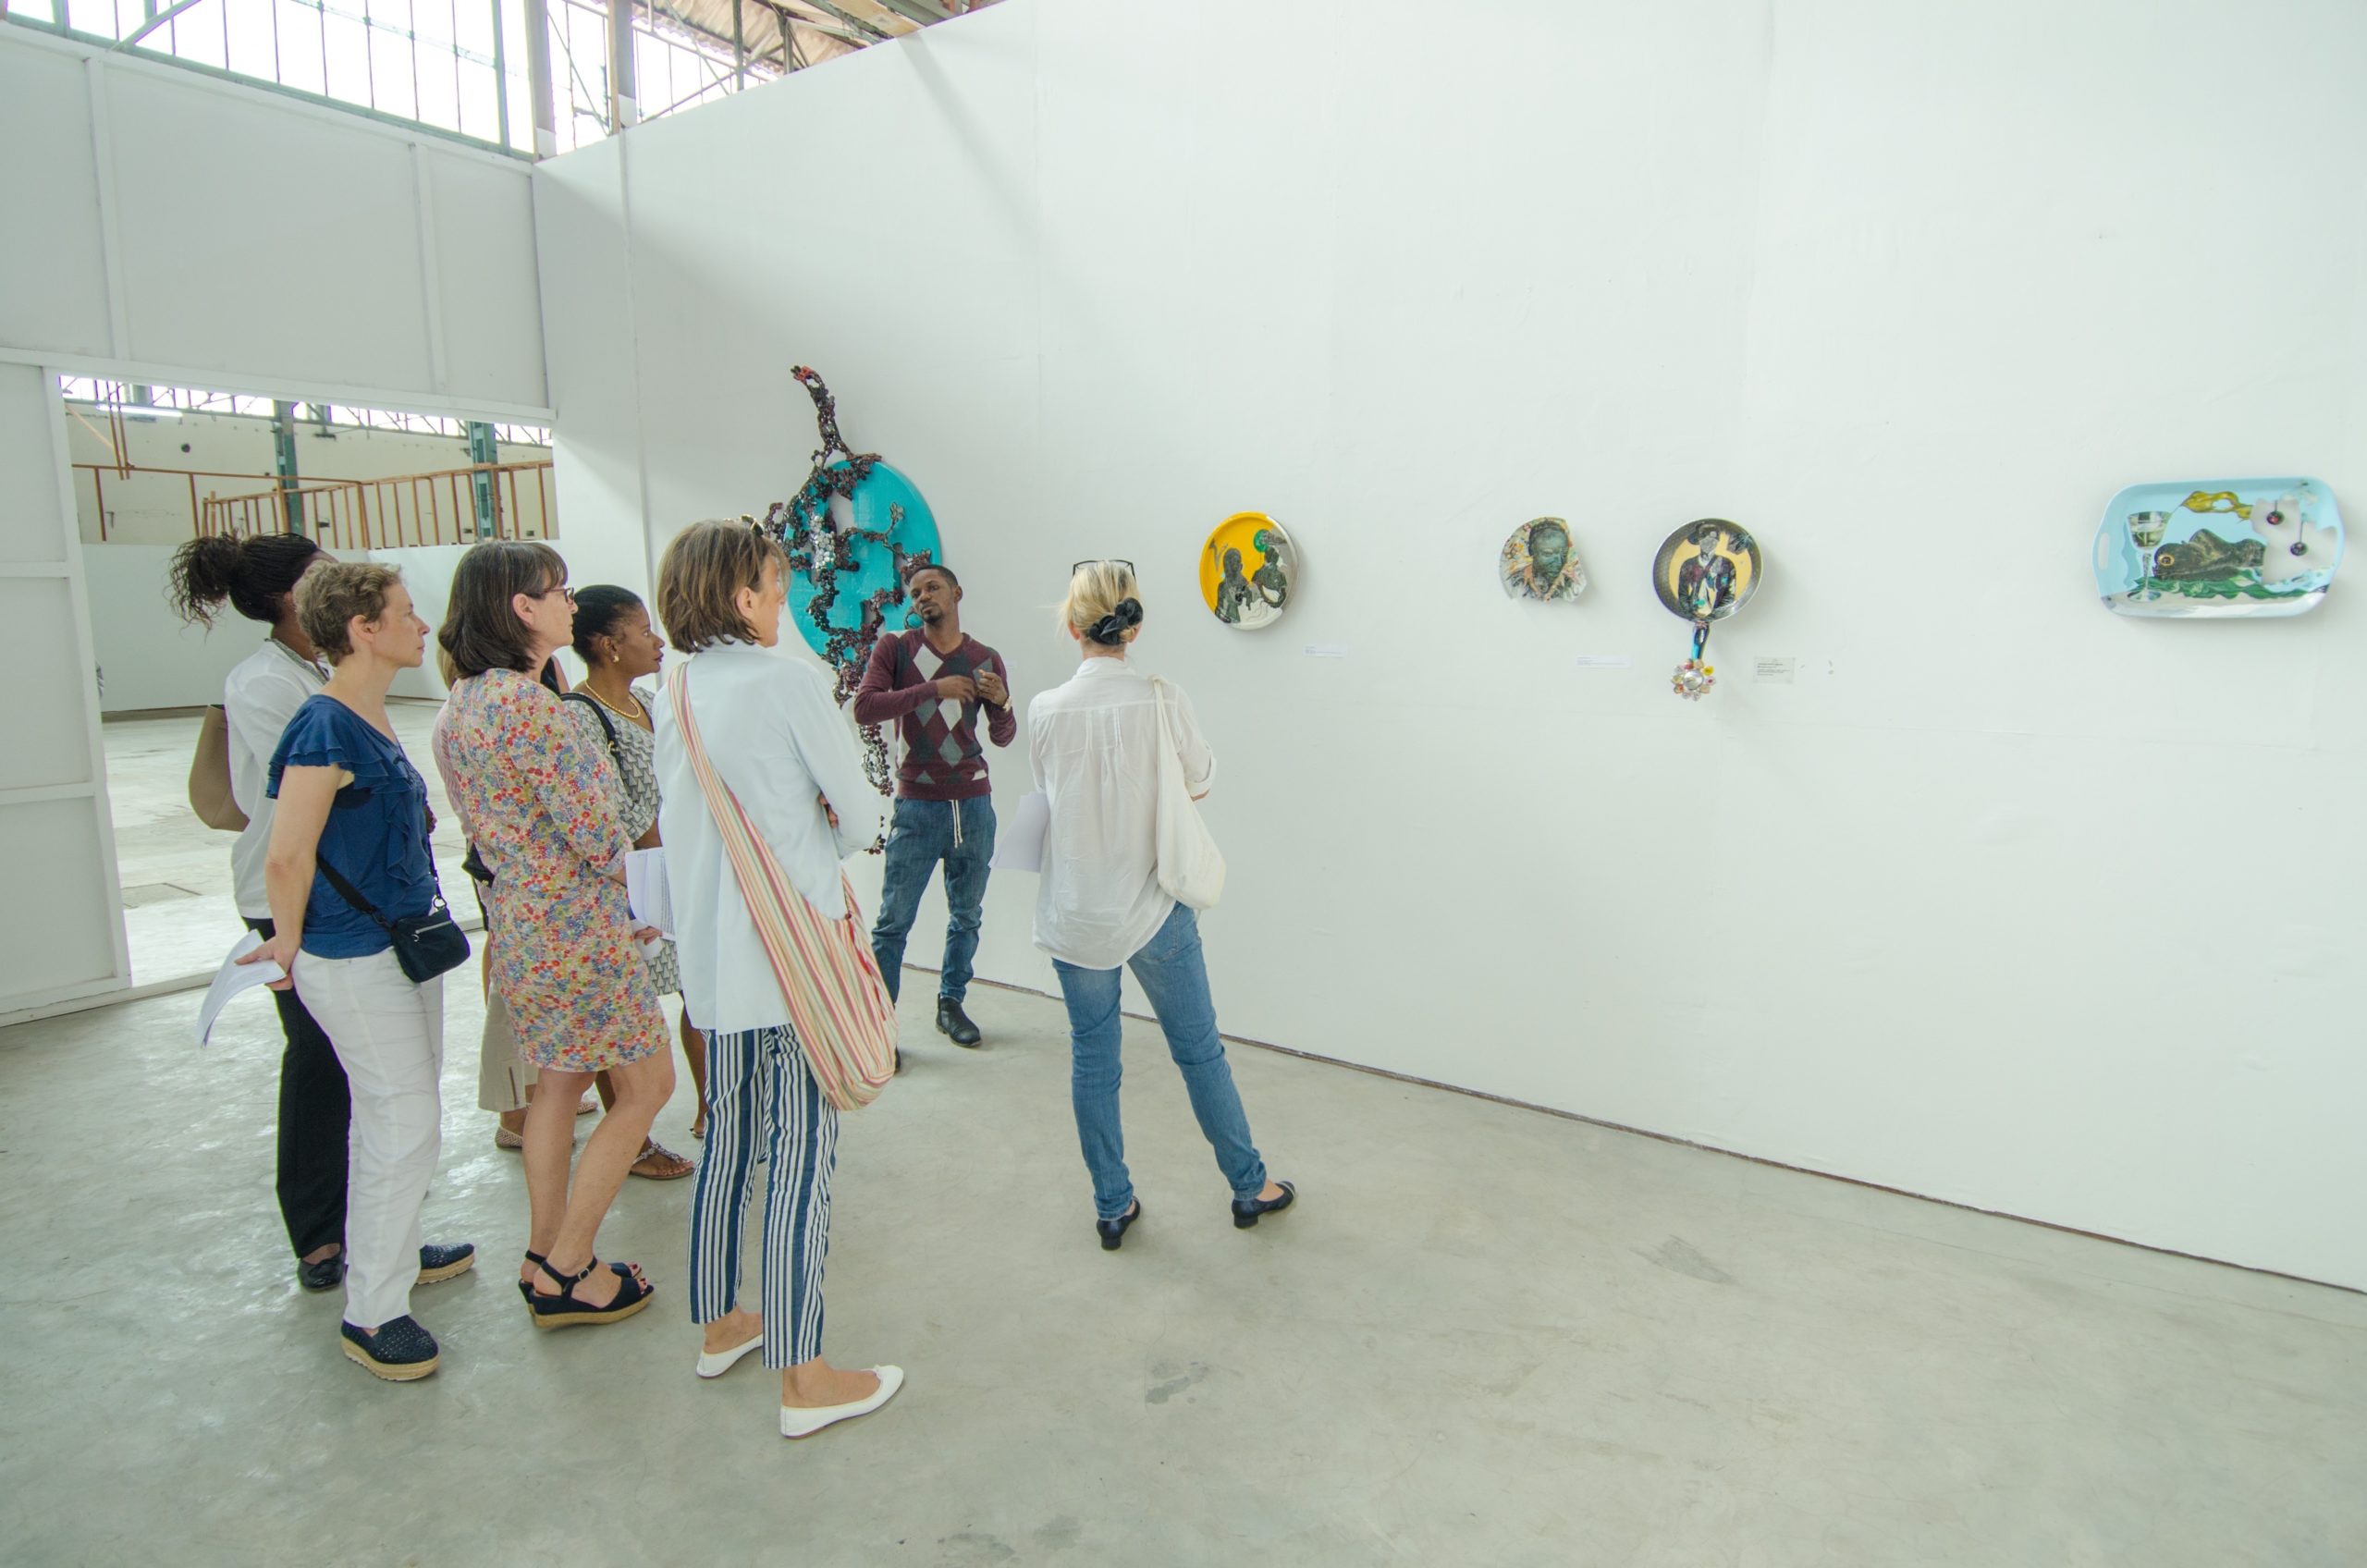 Image of a group of people viewing art pieces hanging on the wall with a guide. Photo provided by courtesy of the artist.